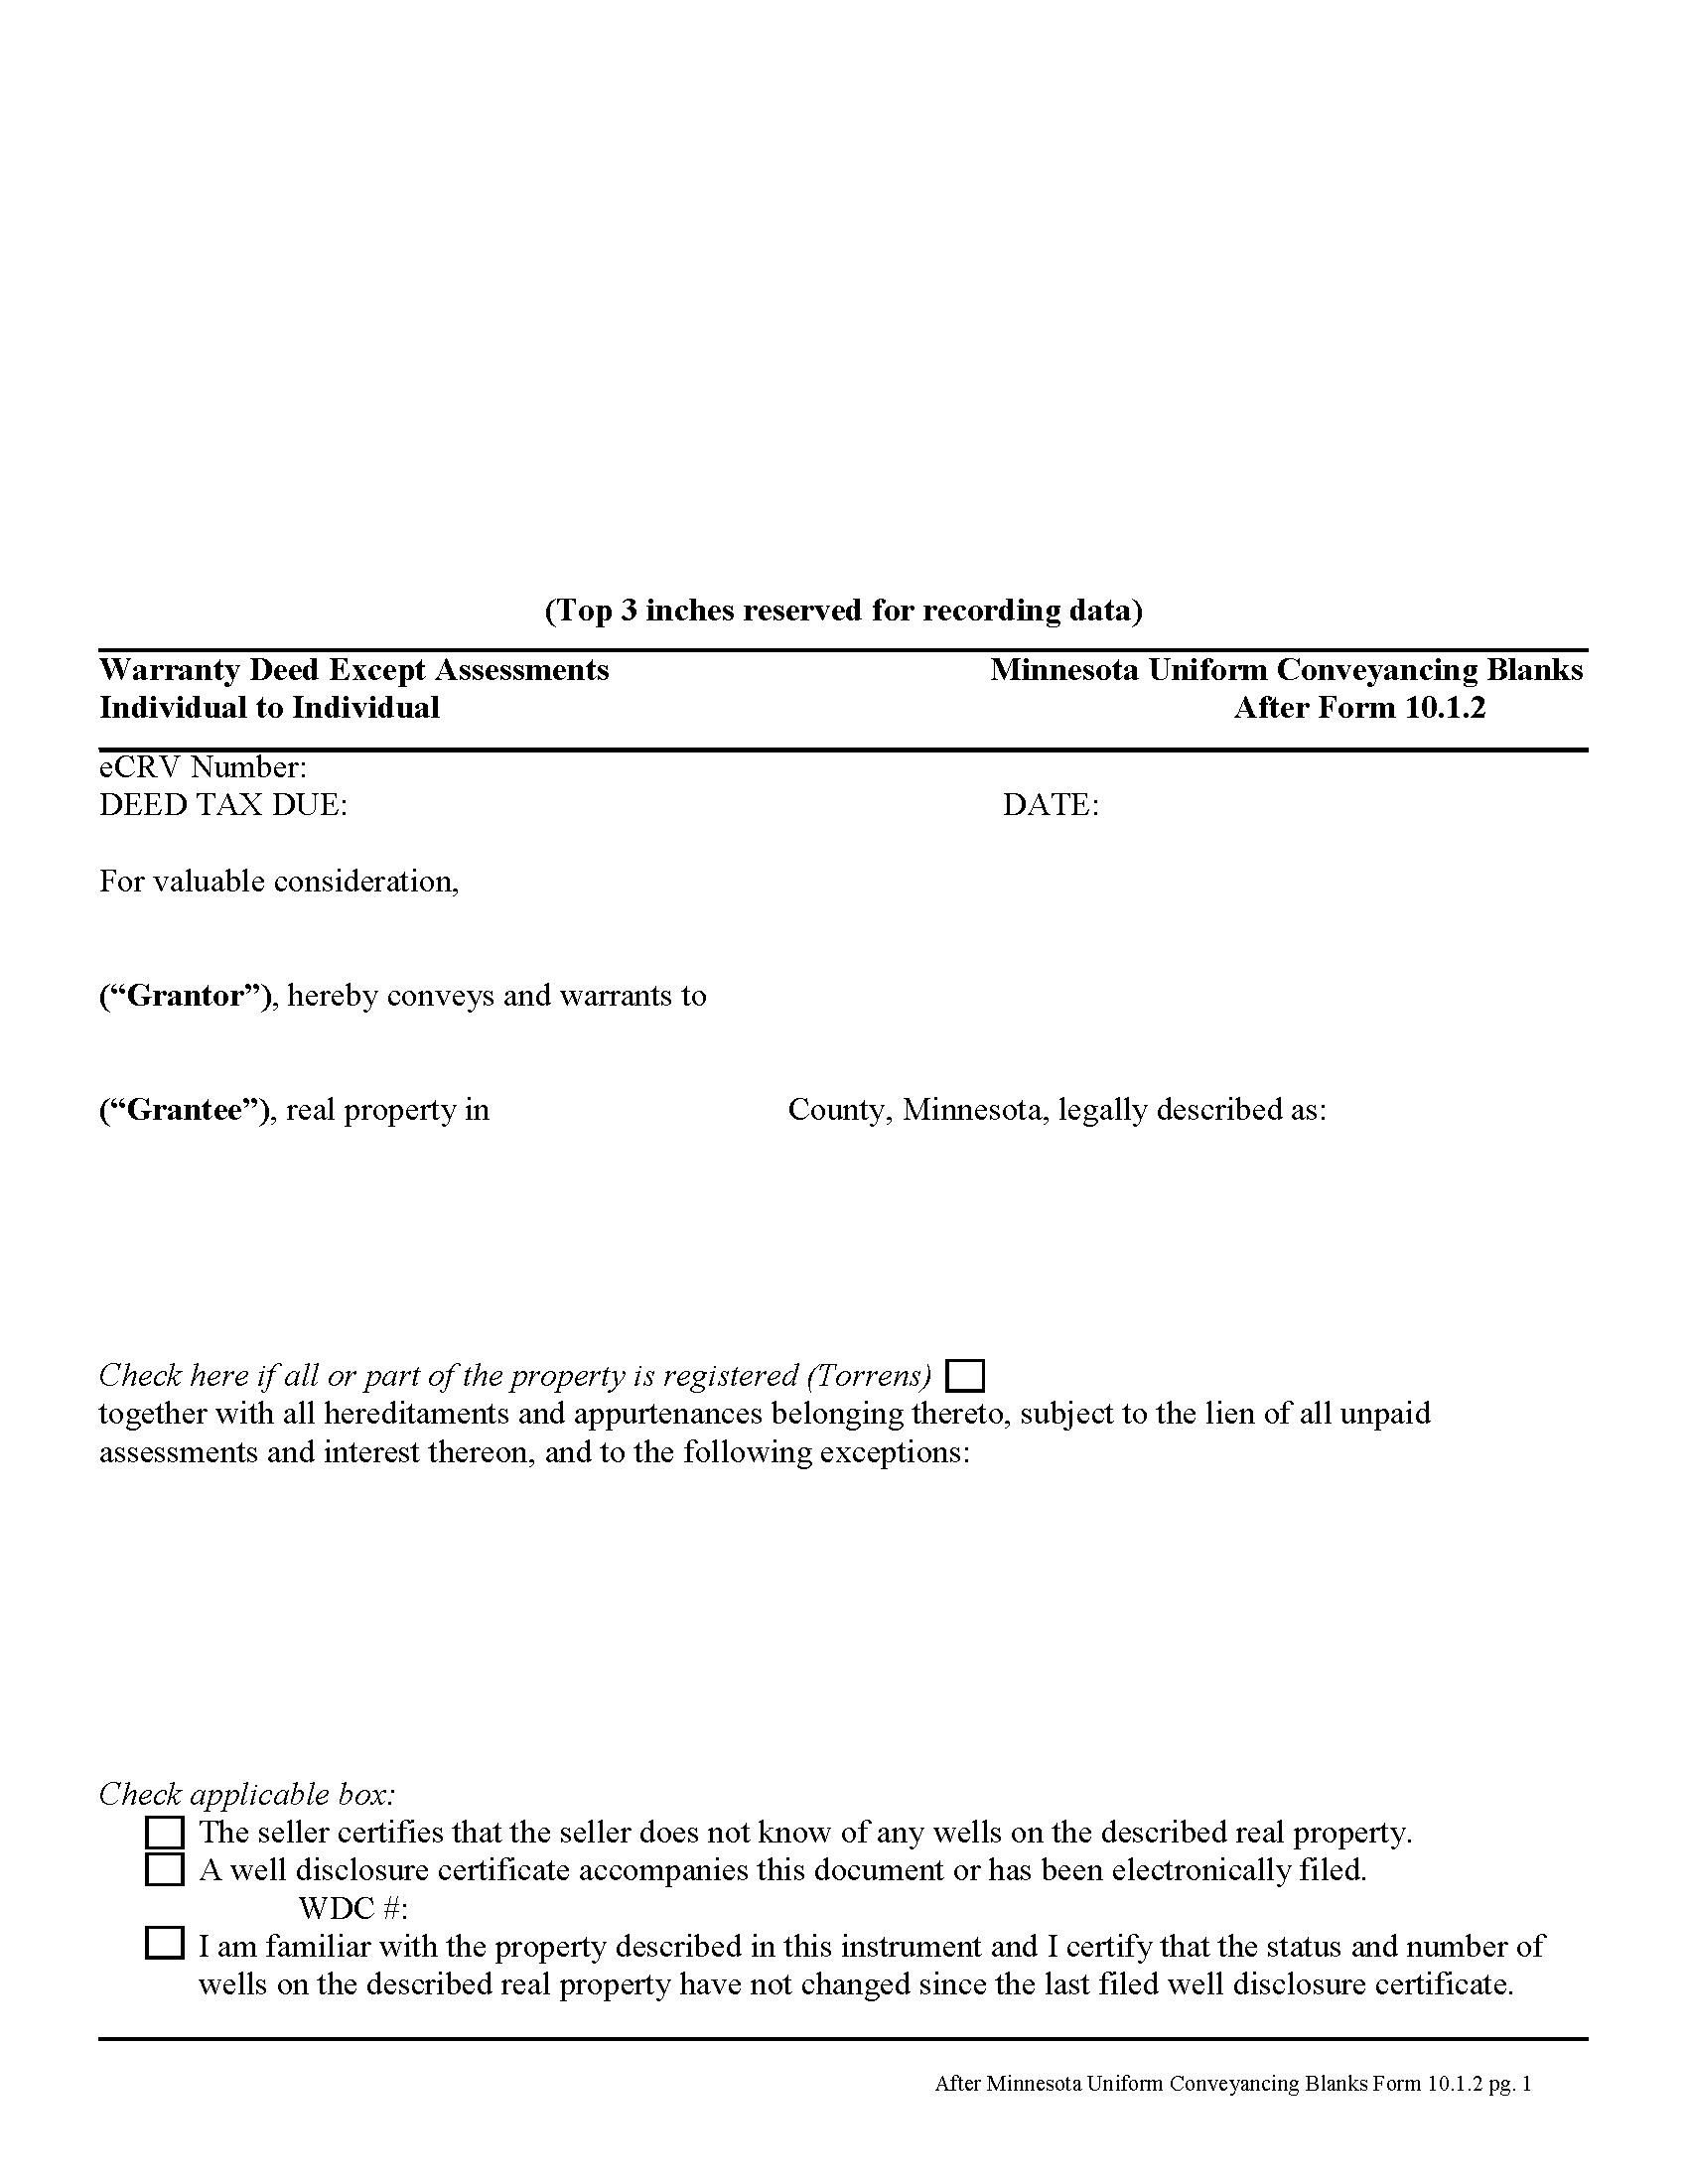 Warranty Deed Excluding Assessment Form